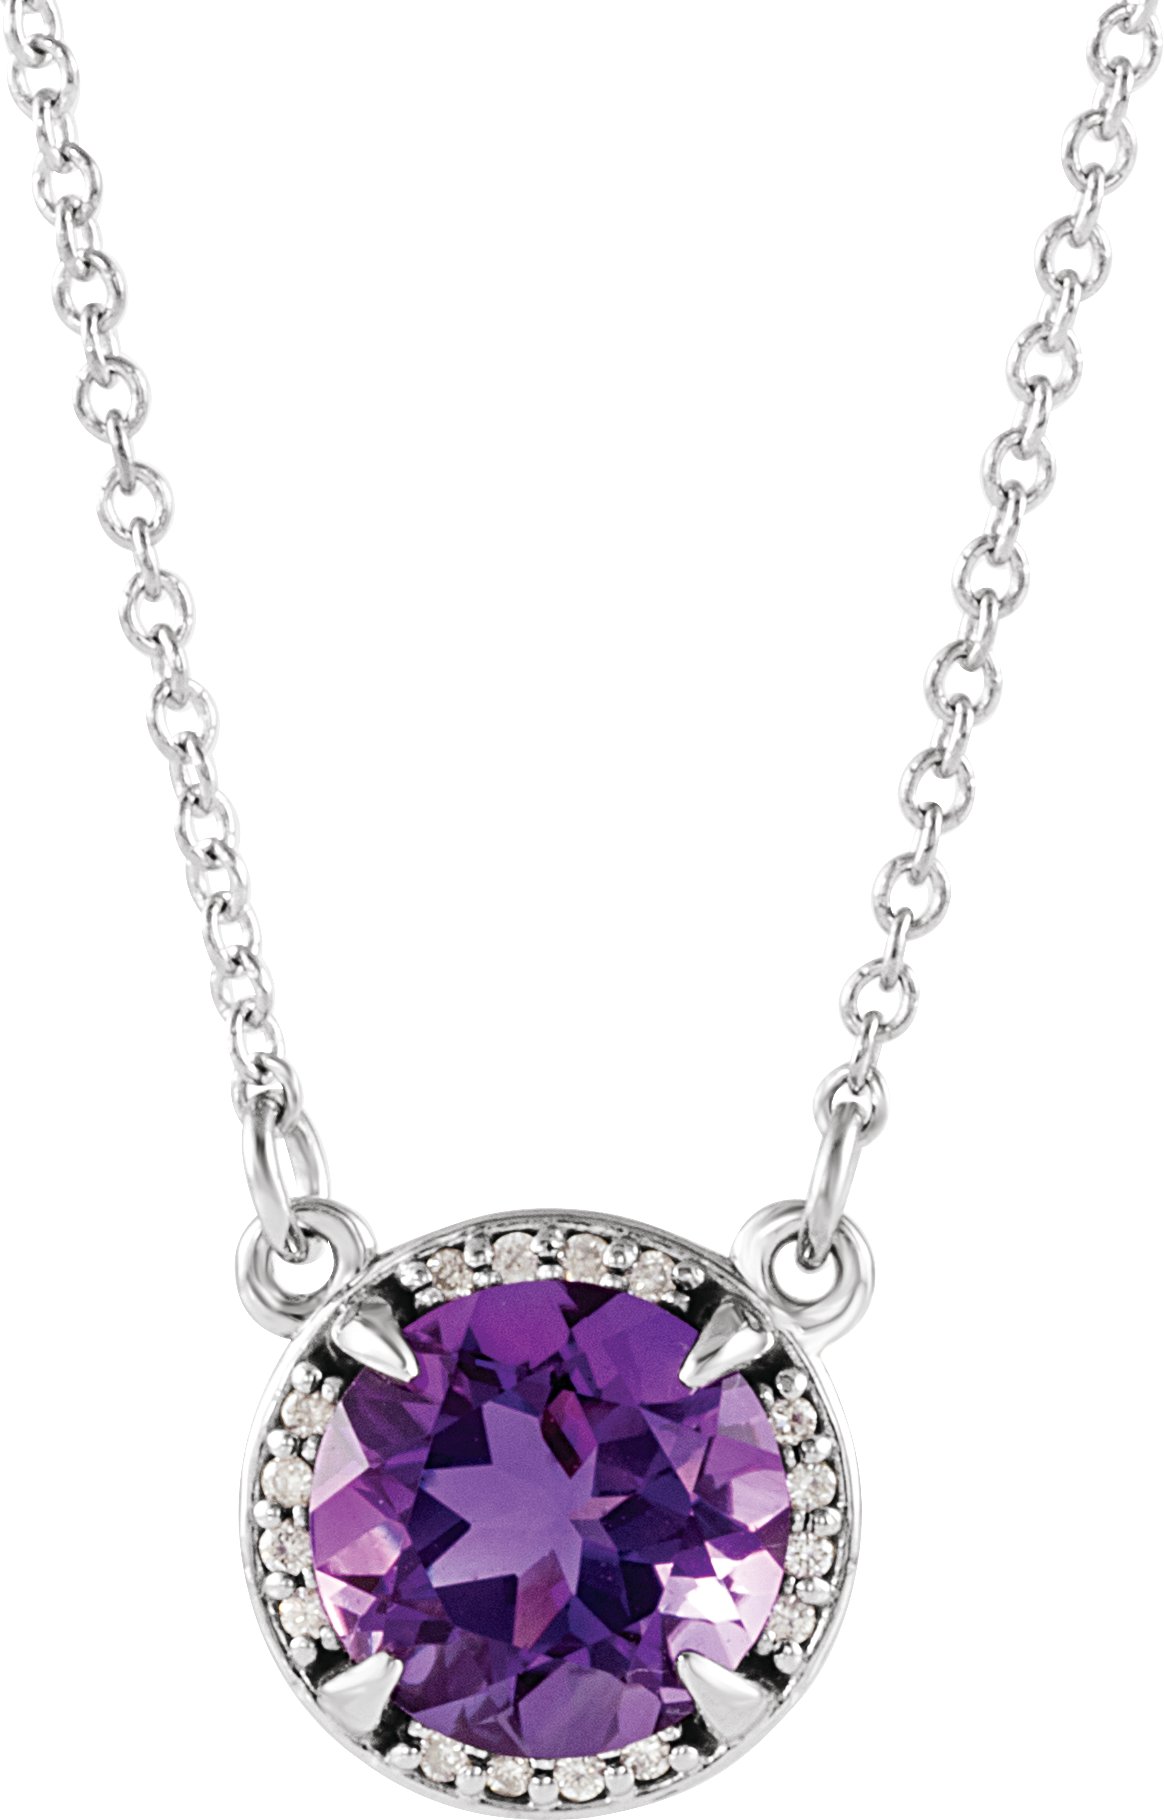 14K White 10 mm Round Amethyst and .07 CTW Diamond 16 inch Necklace Ref 12323862